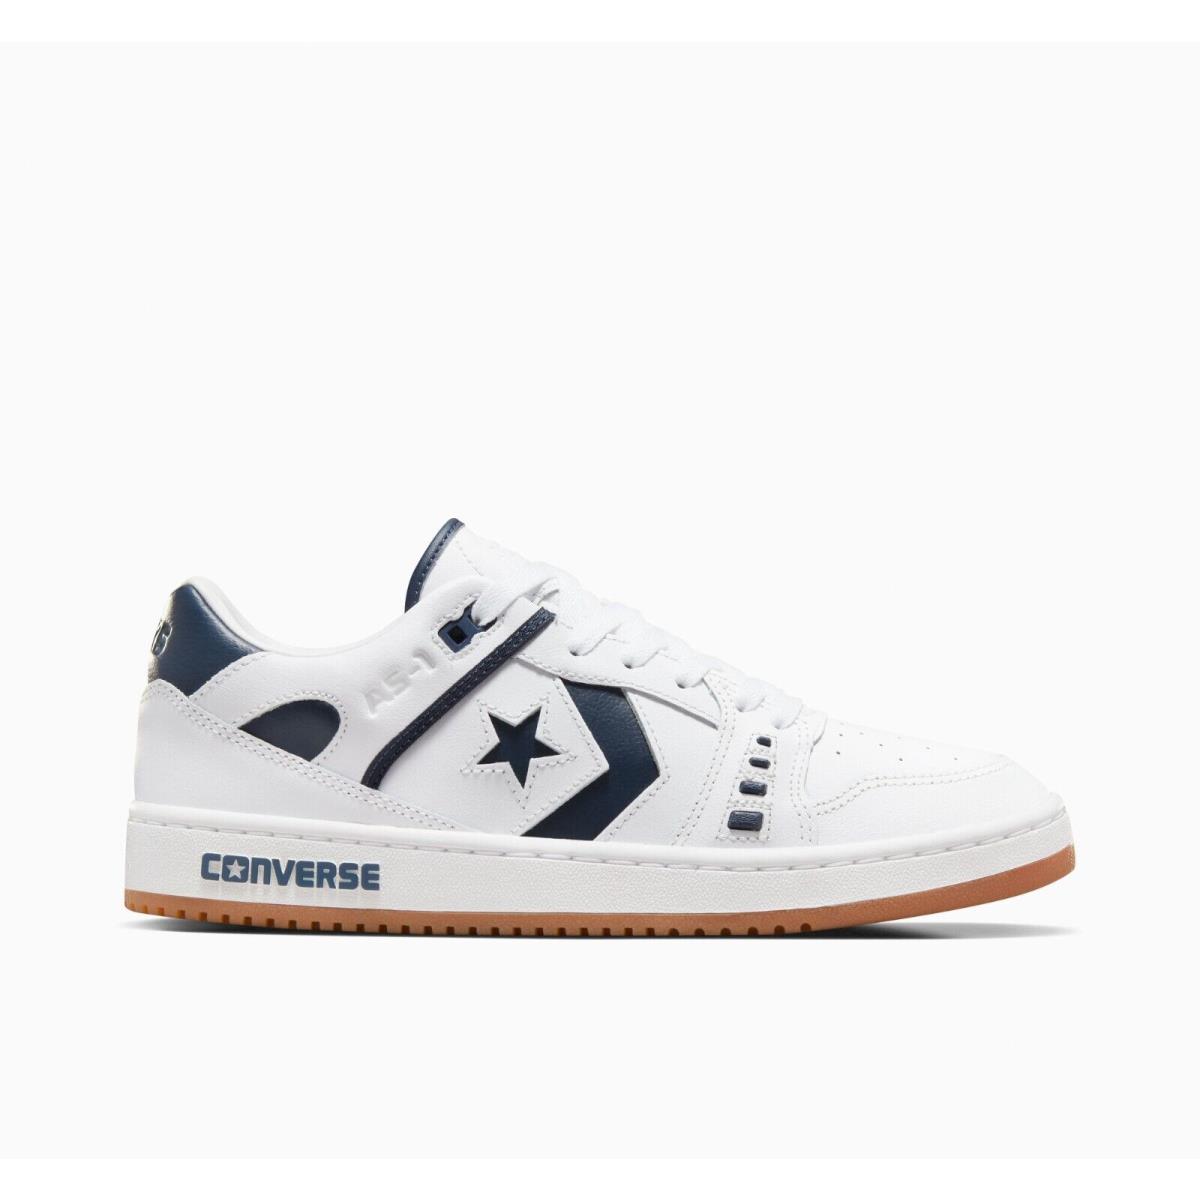 Converse Men`s Cons AS-1 Pro Leather Upper Foam Cushioning Limited Edition Shoes White/Navy/Gum